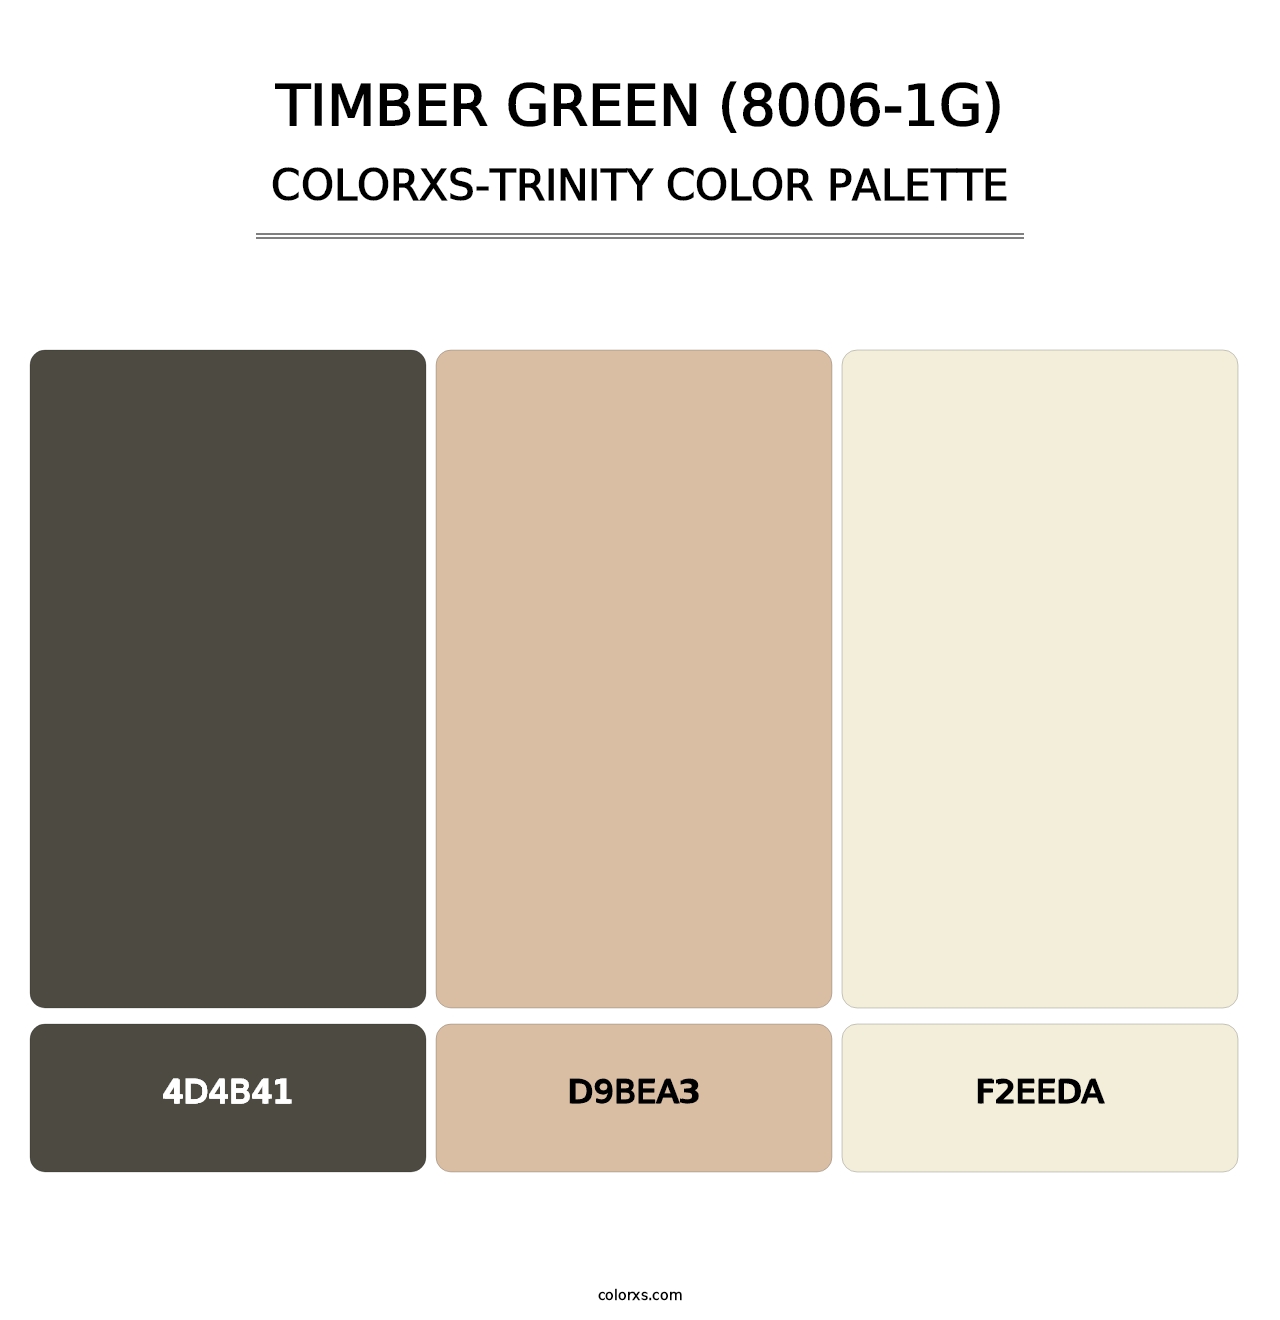 Timber Green (8006-1G) - Colorxs Trinity Palette